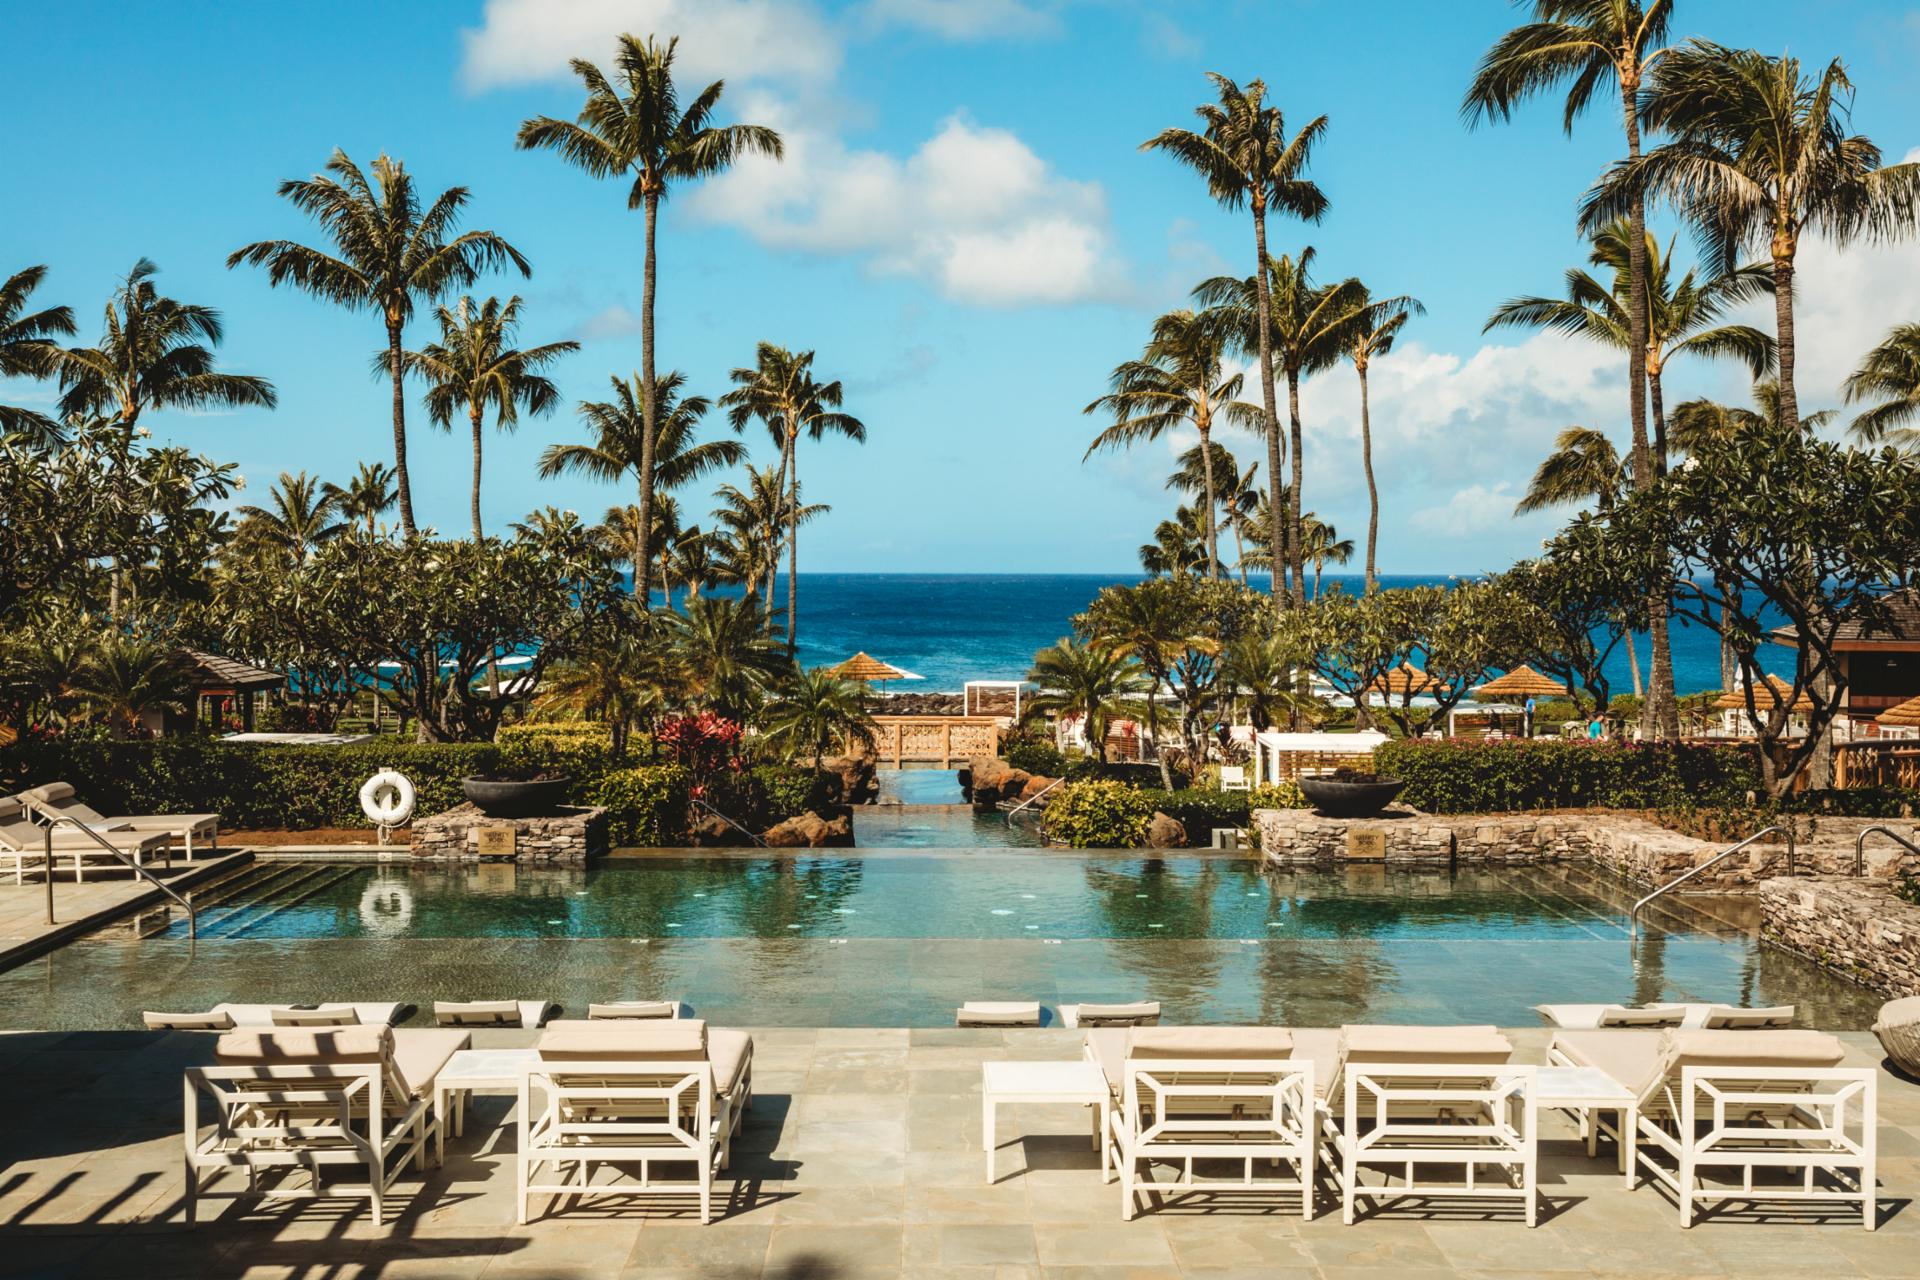 One of the pools at montage that overlooks Kapalua Bay and the Ocean!